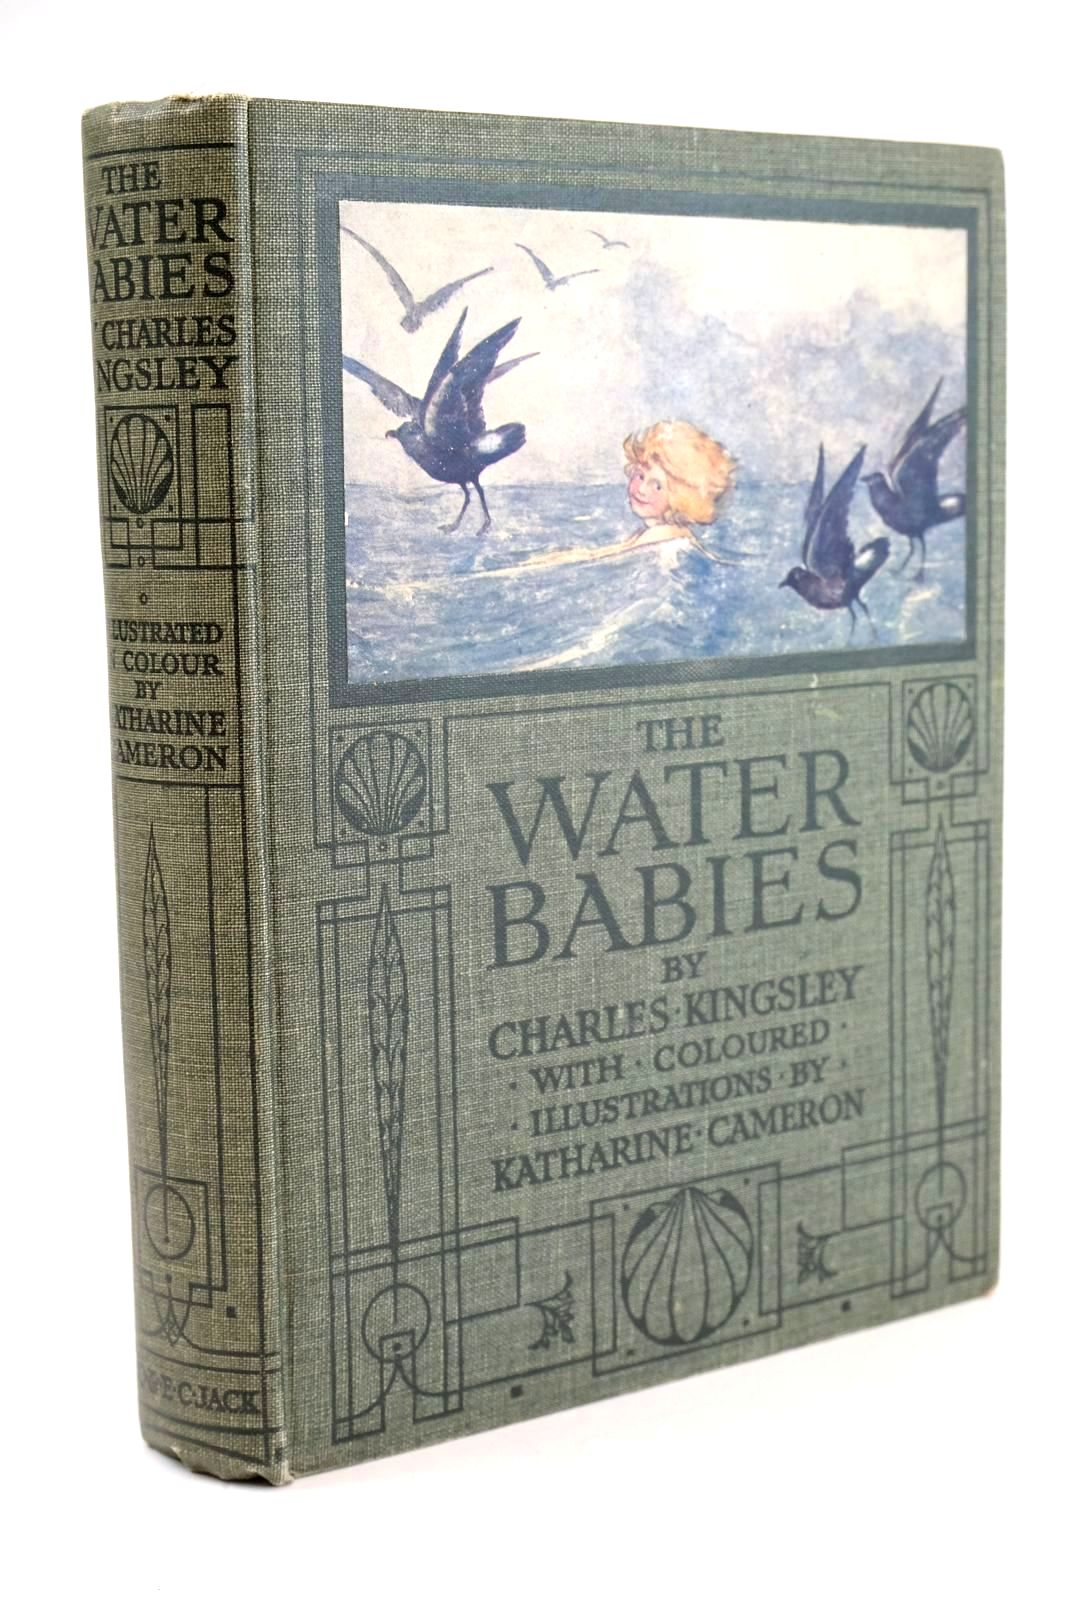 Photo of THE WATER BABIES written by Kingsley, Charles illustrated by Cameron, Katharine published by T.C. &amp; E.C. Jack Ltd. (STOCK CODE: 1325017)  for sale by Stella & Rose's Books